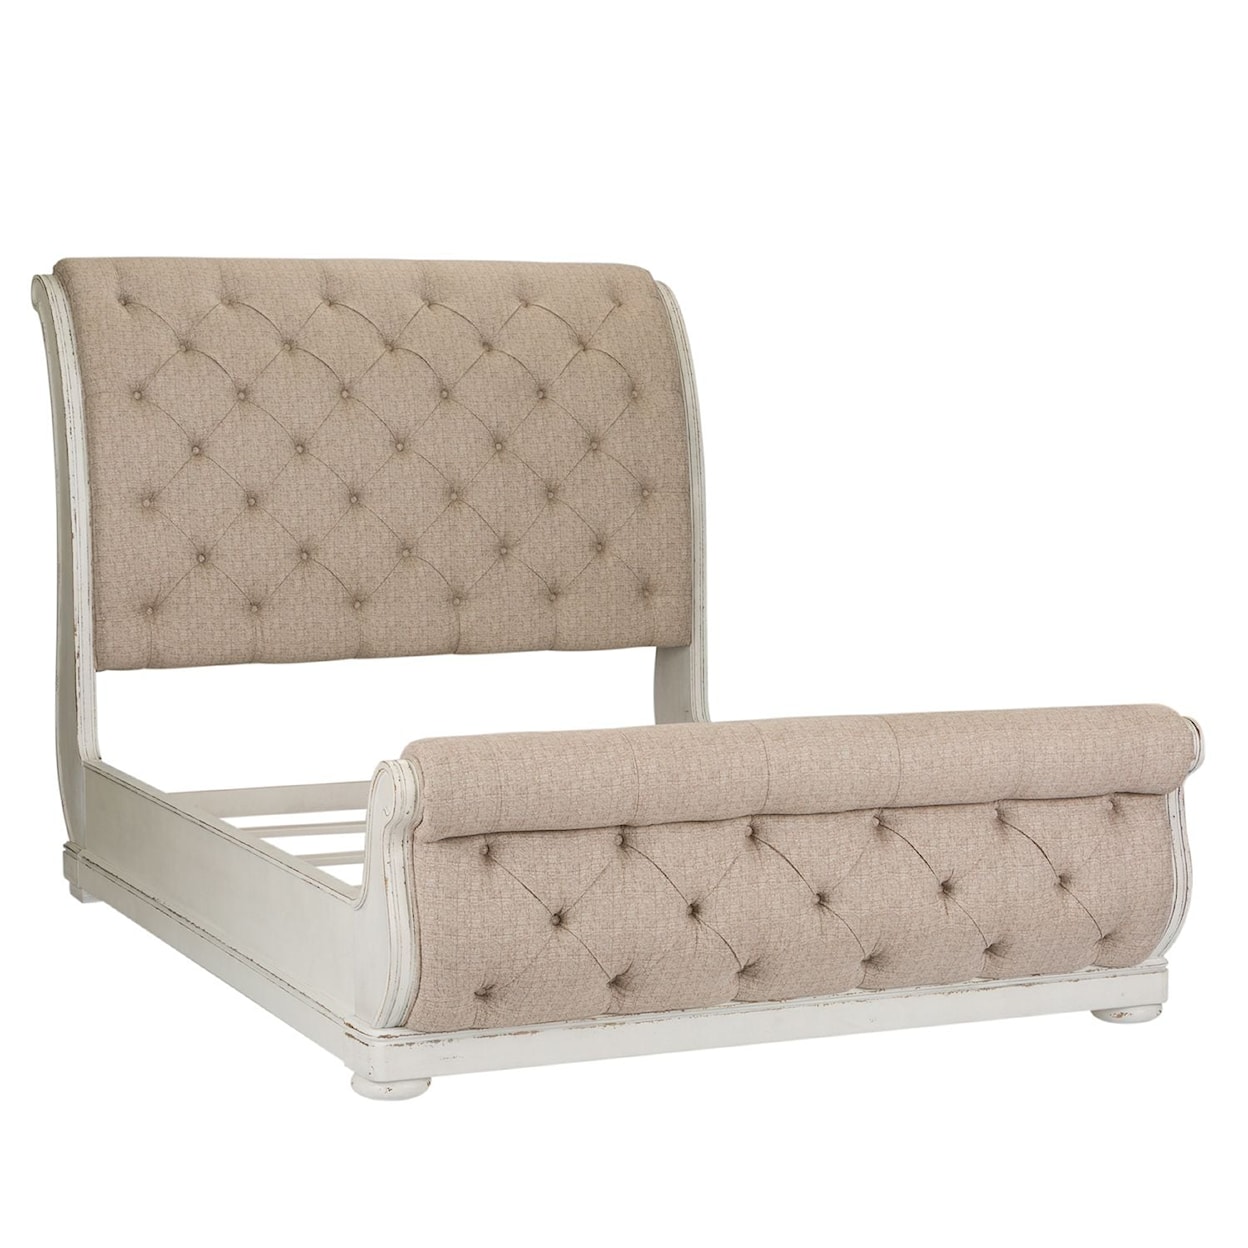 Liberty Furniture Abbey Park 3-Piece Upholstered Queen Sleigh Bedroom Set